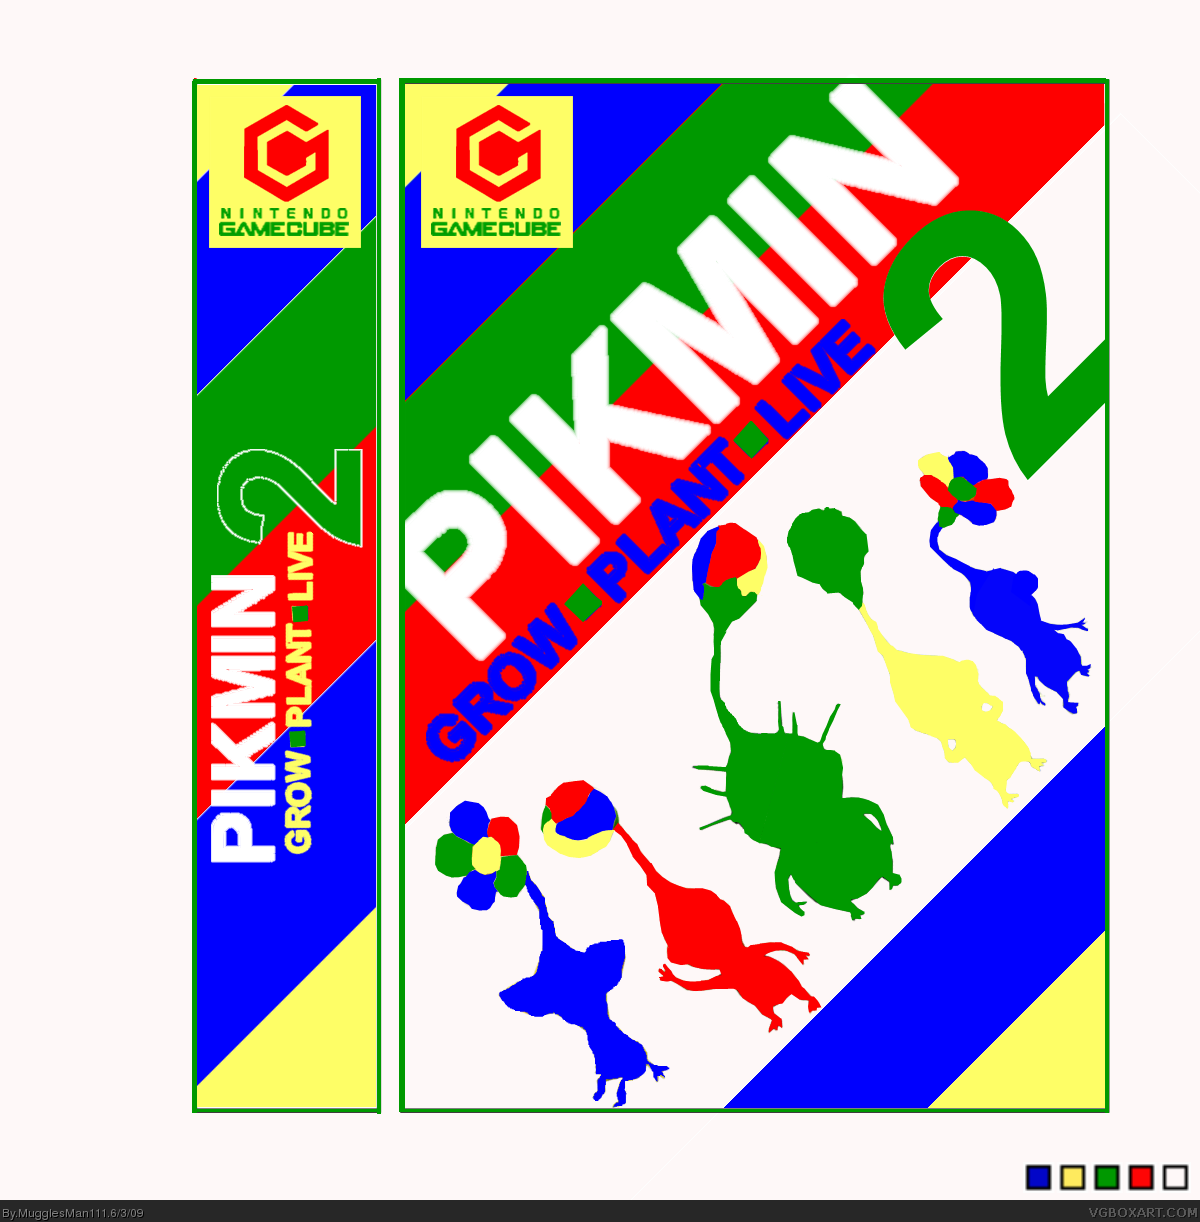 Pikmin 2 box cover